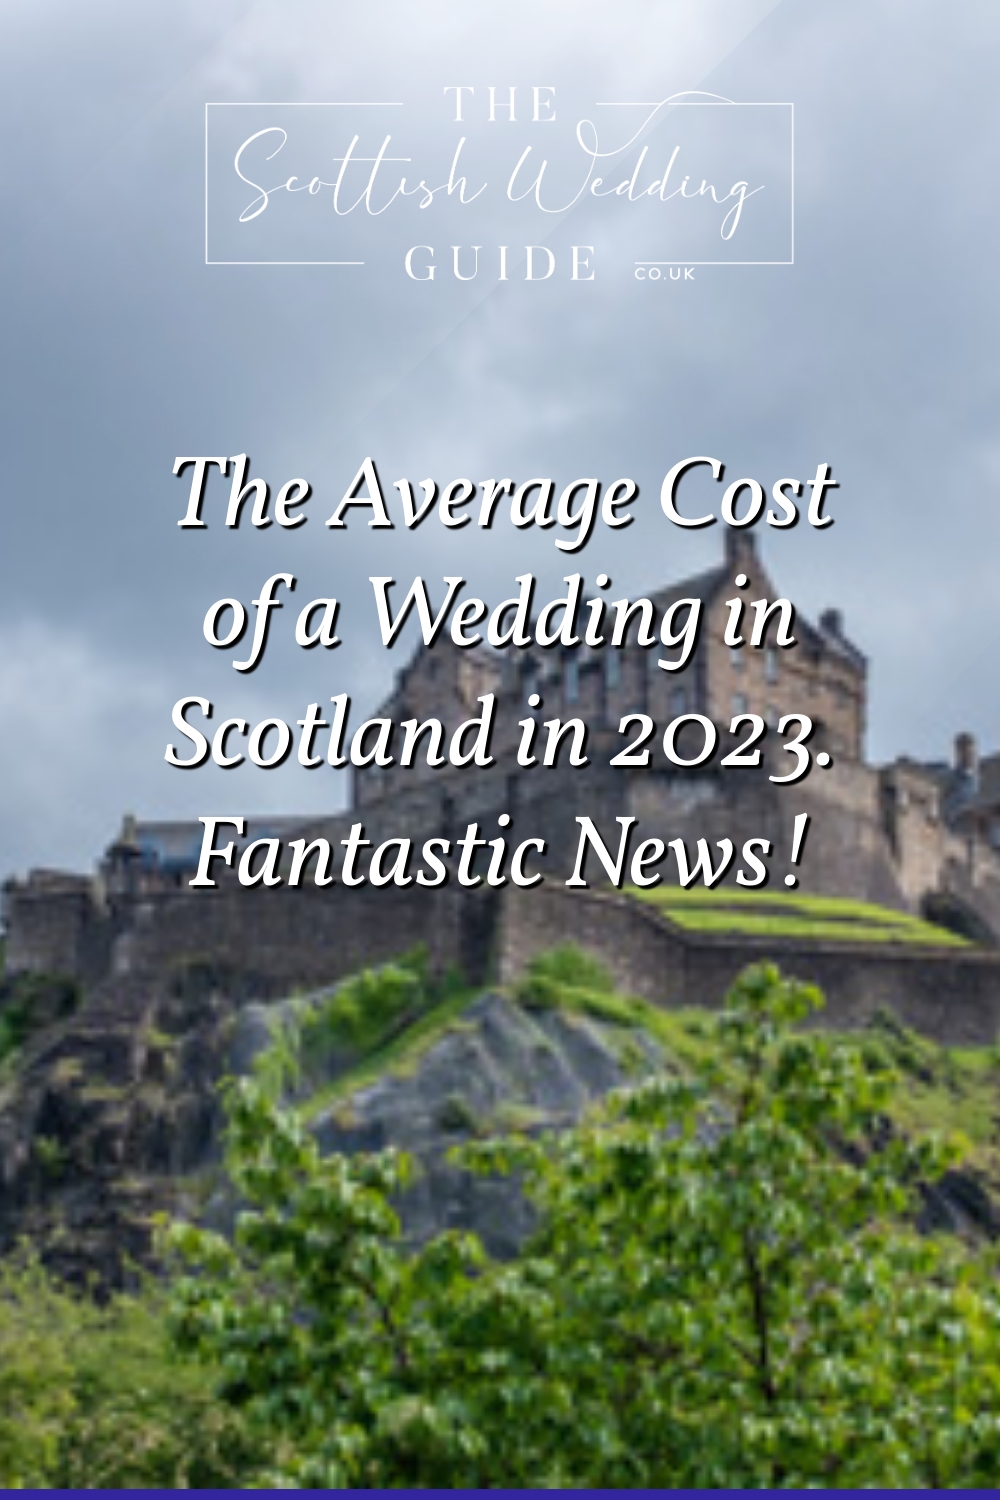 The Average Cost of a Wedding in Scotland in 2023. Fantastic News!